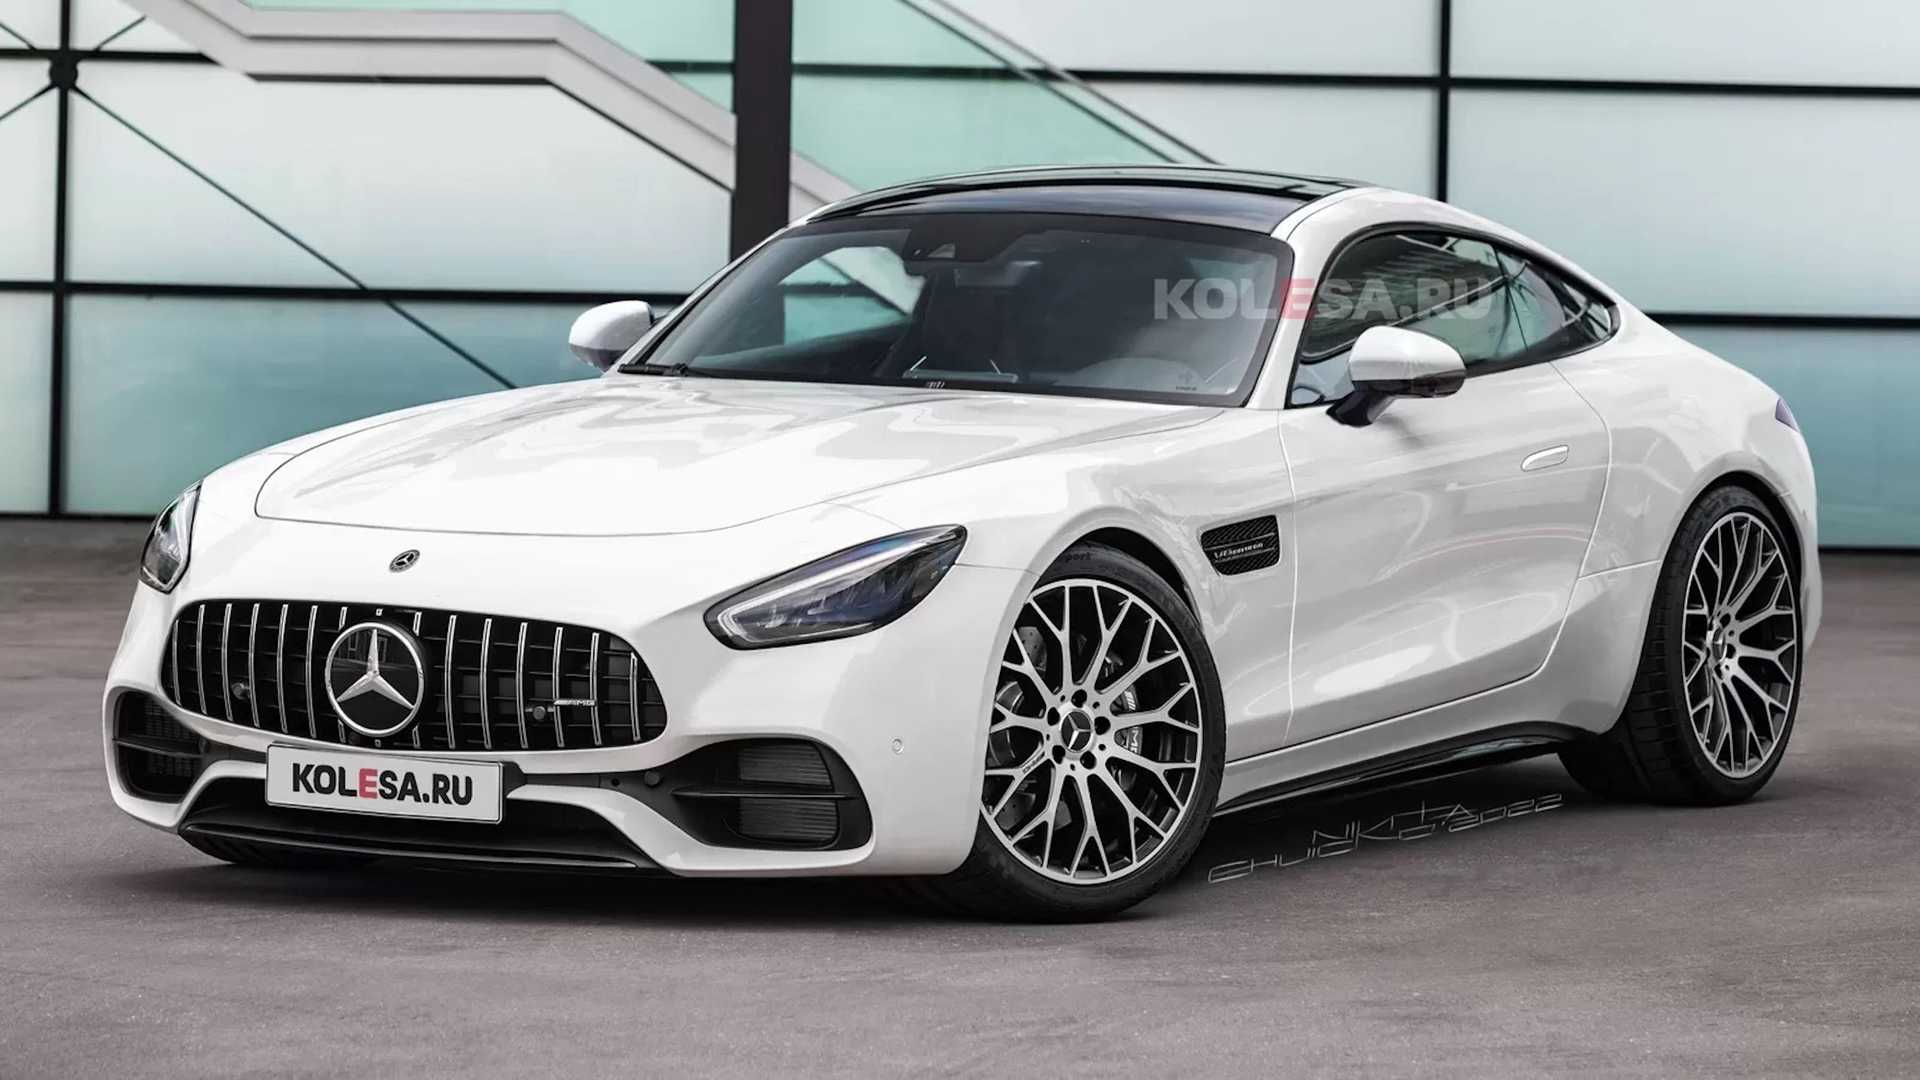 2023 Mercedes-AMG GT Coupe Renderings Depict A Sleek 911 Competitor